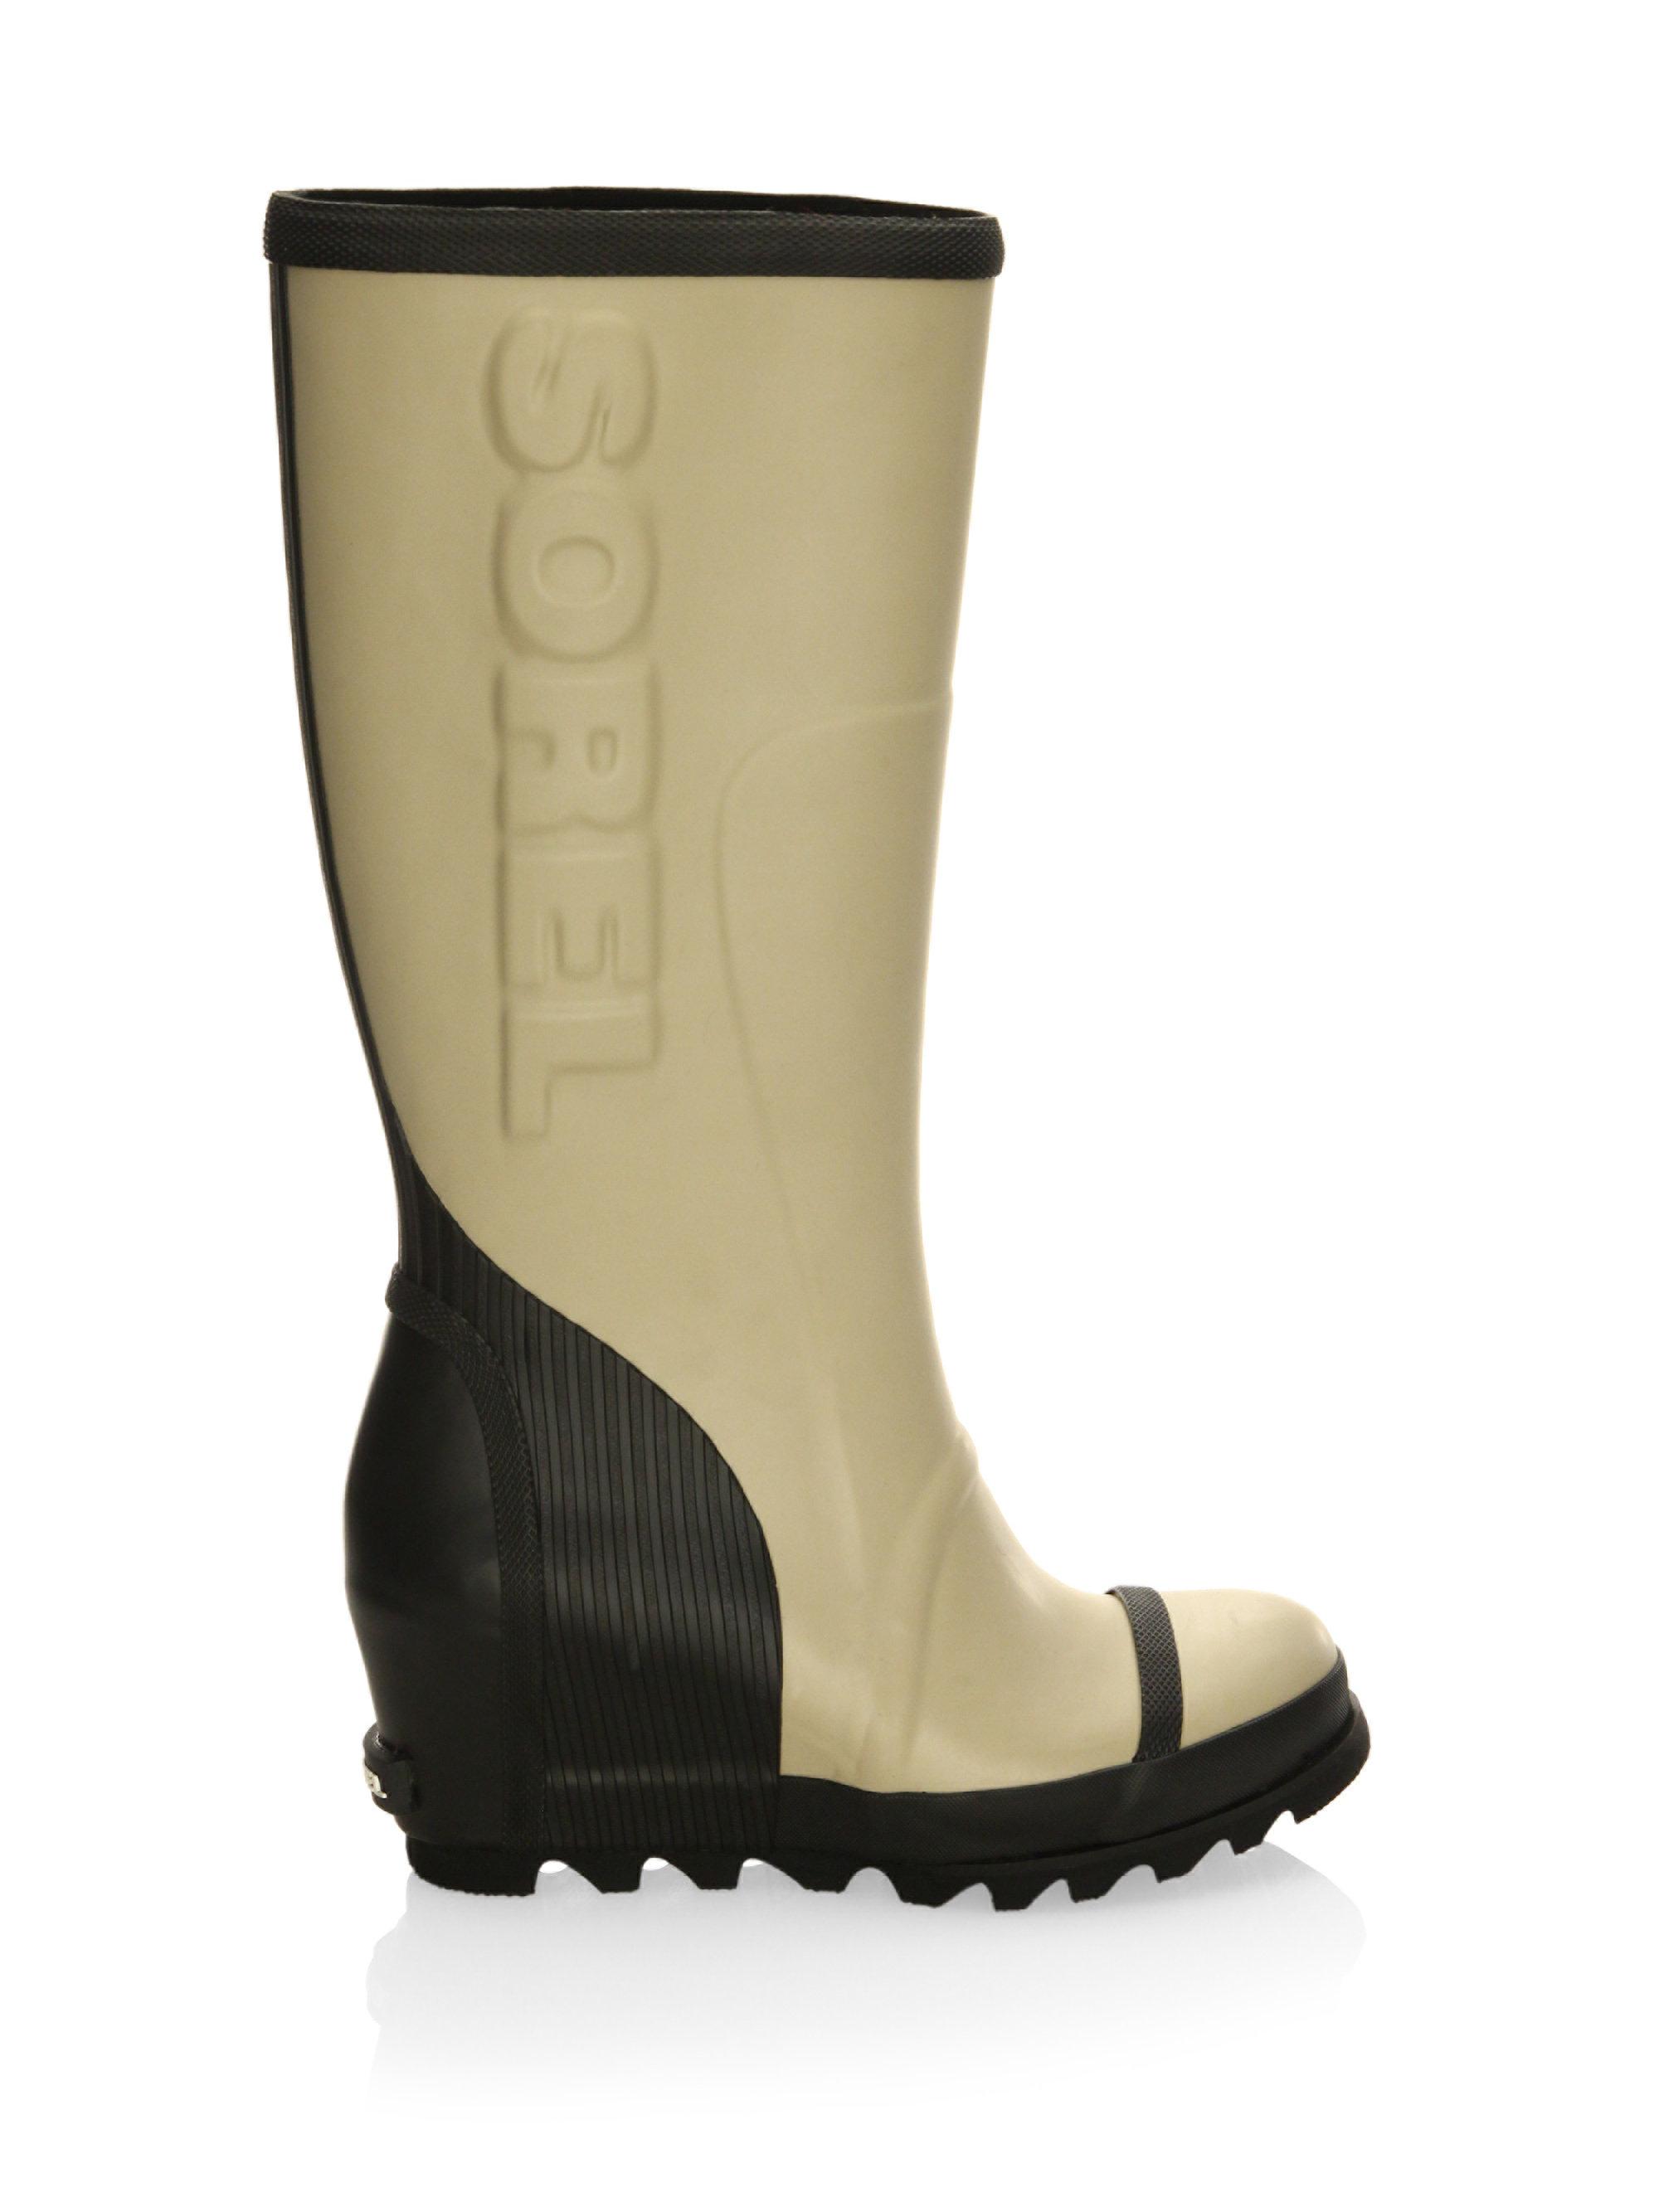 wedge rubber boots